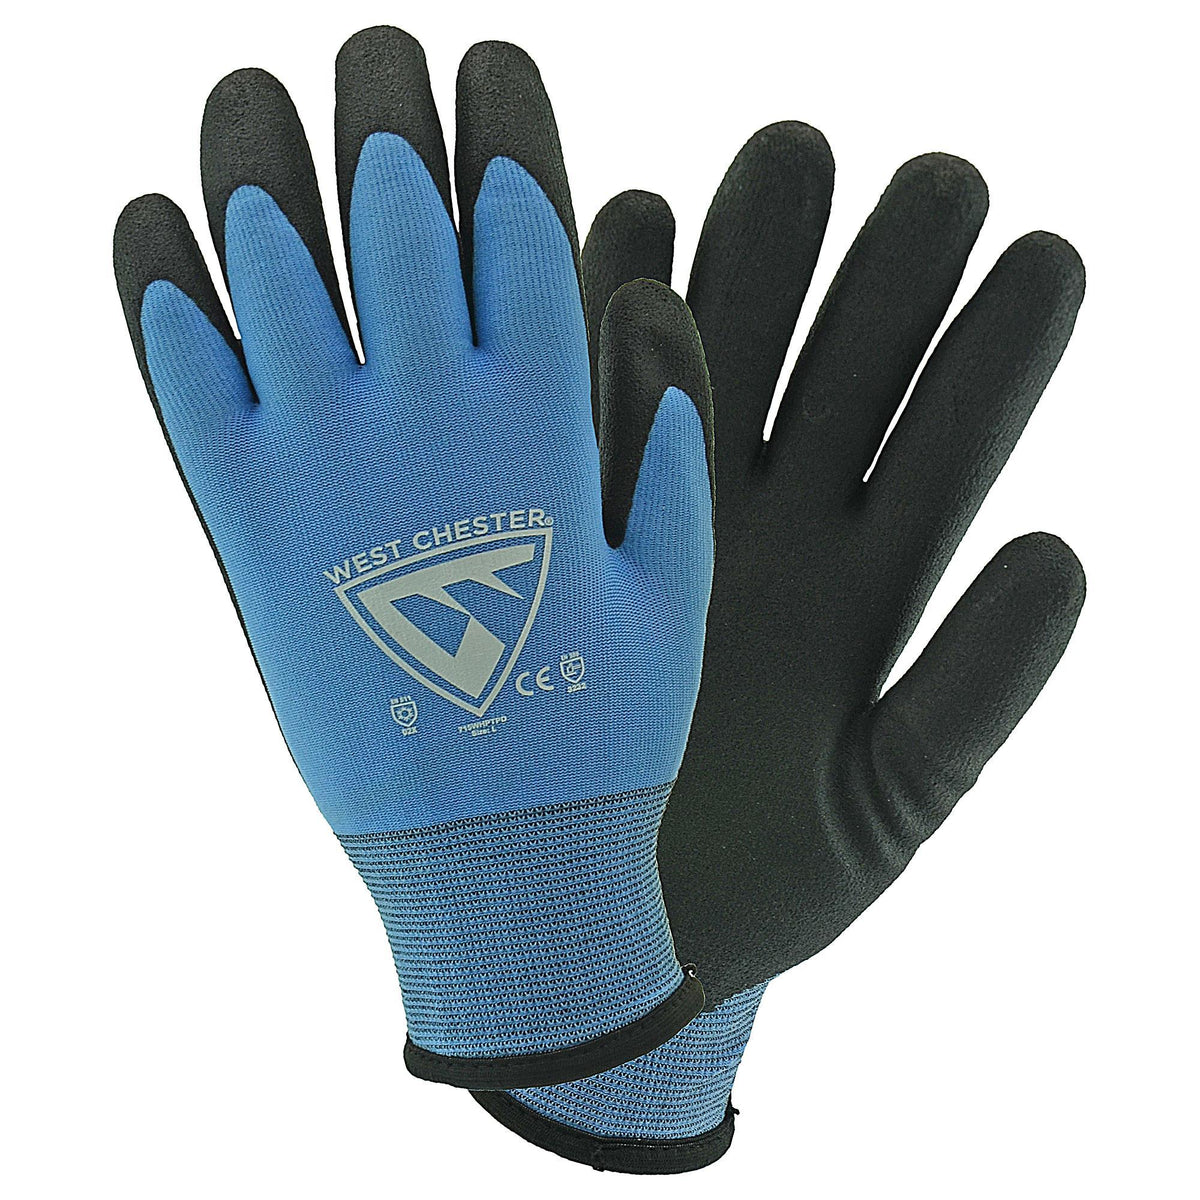 Westchester Winter Glove with HPT Coating 1pair